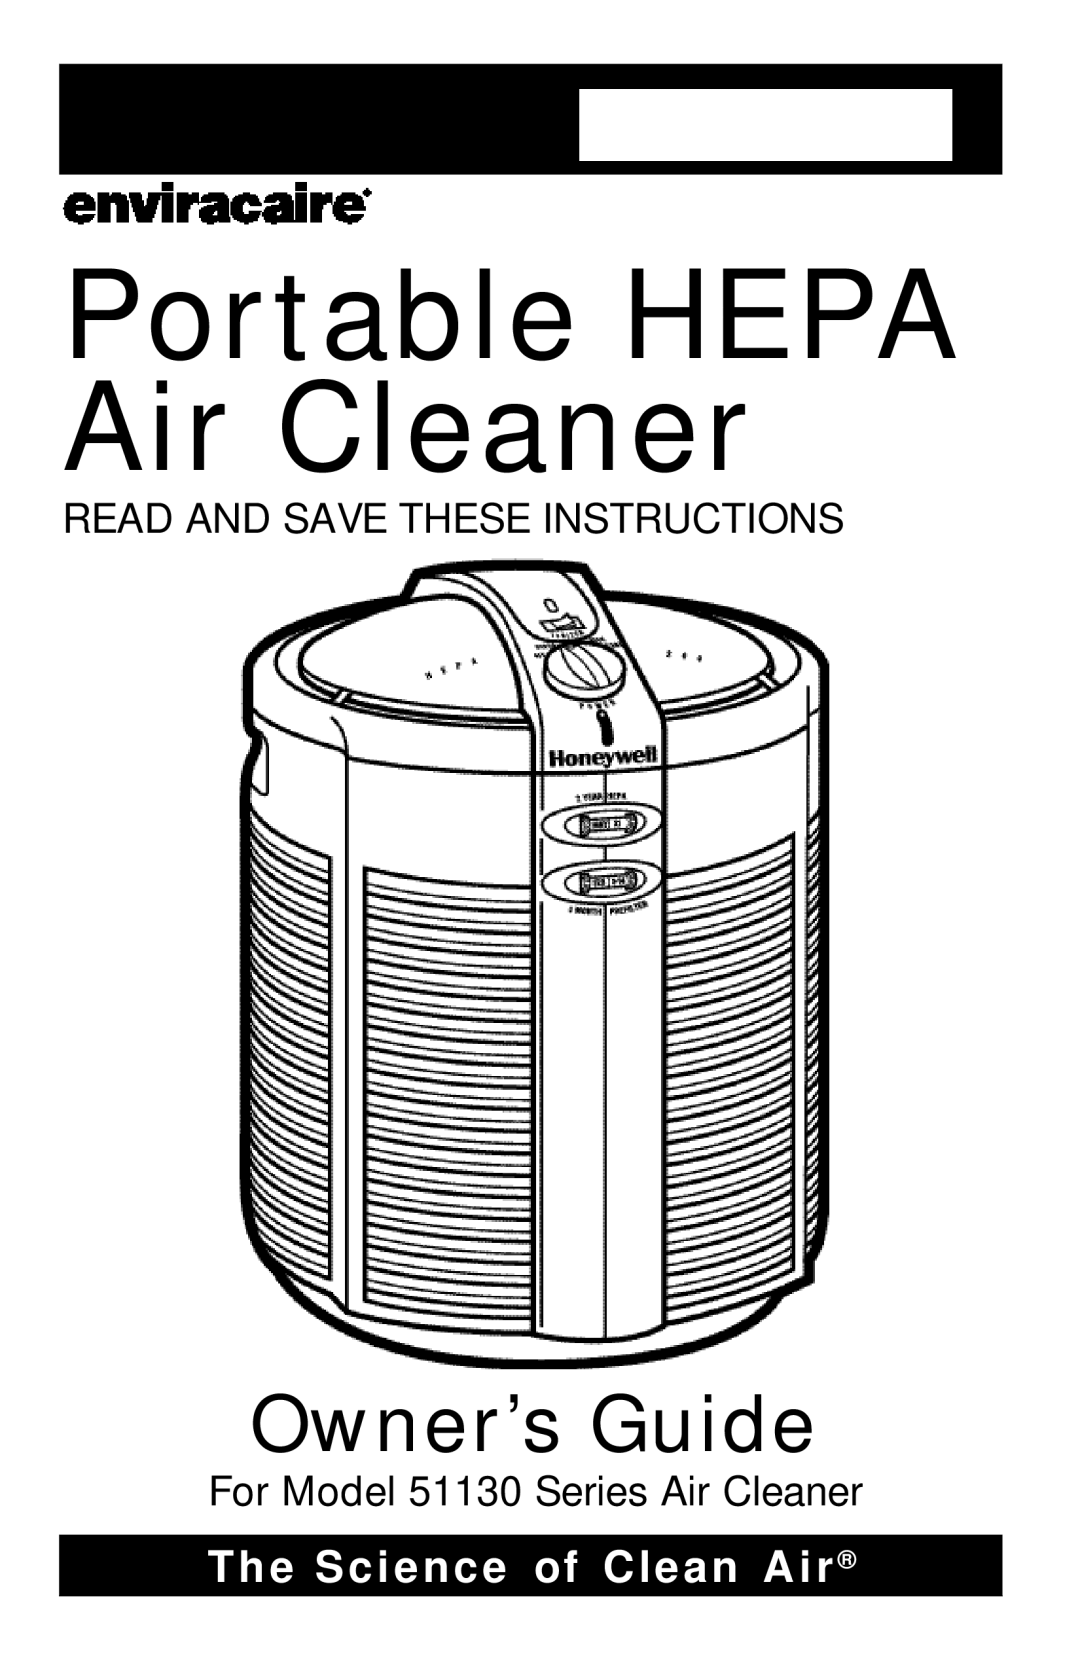 Honeywell 51130 Series manual Portable HEPA Air Cleaner, Owner’s Guide, The Science of Clean A i r 